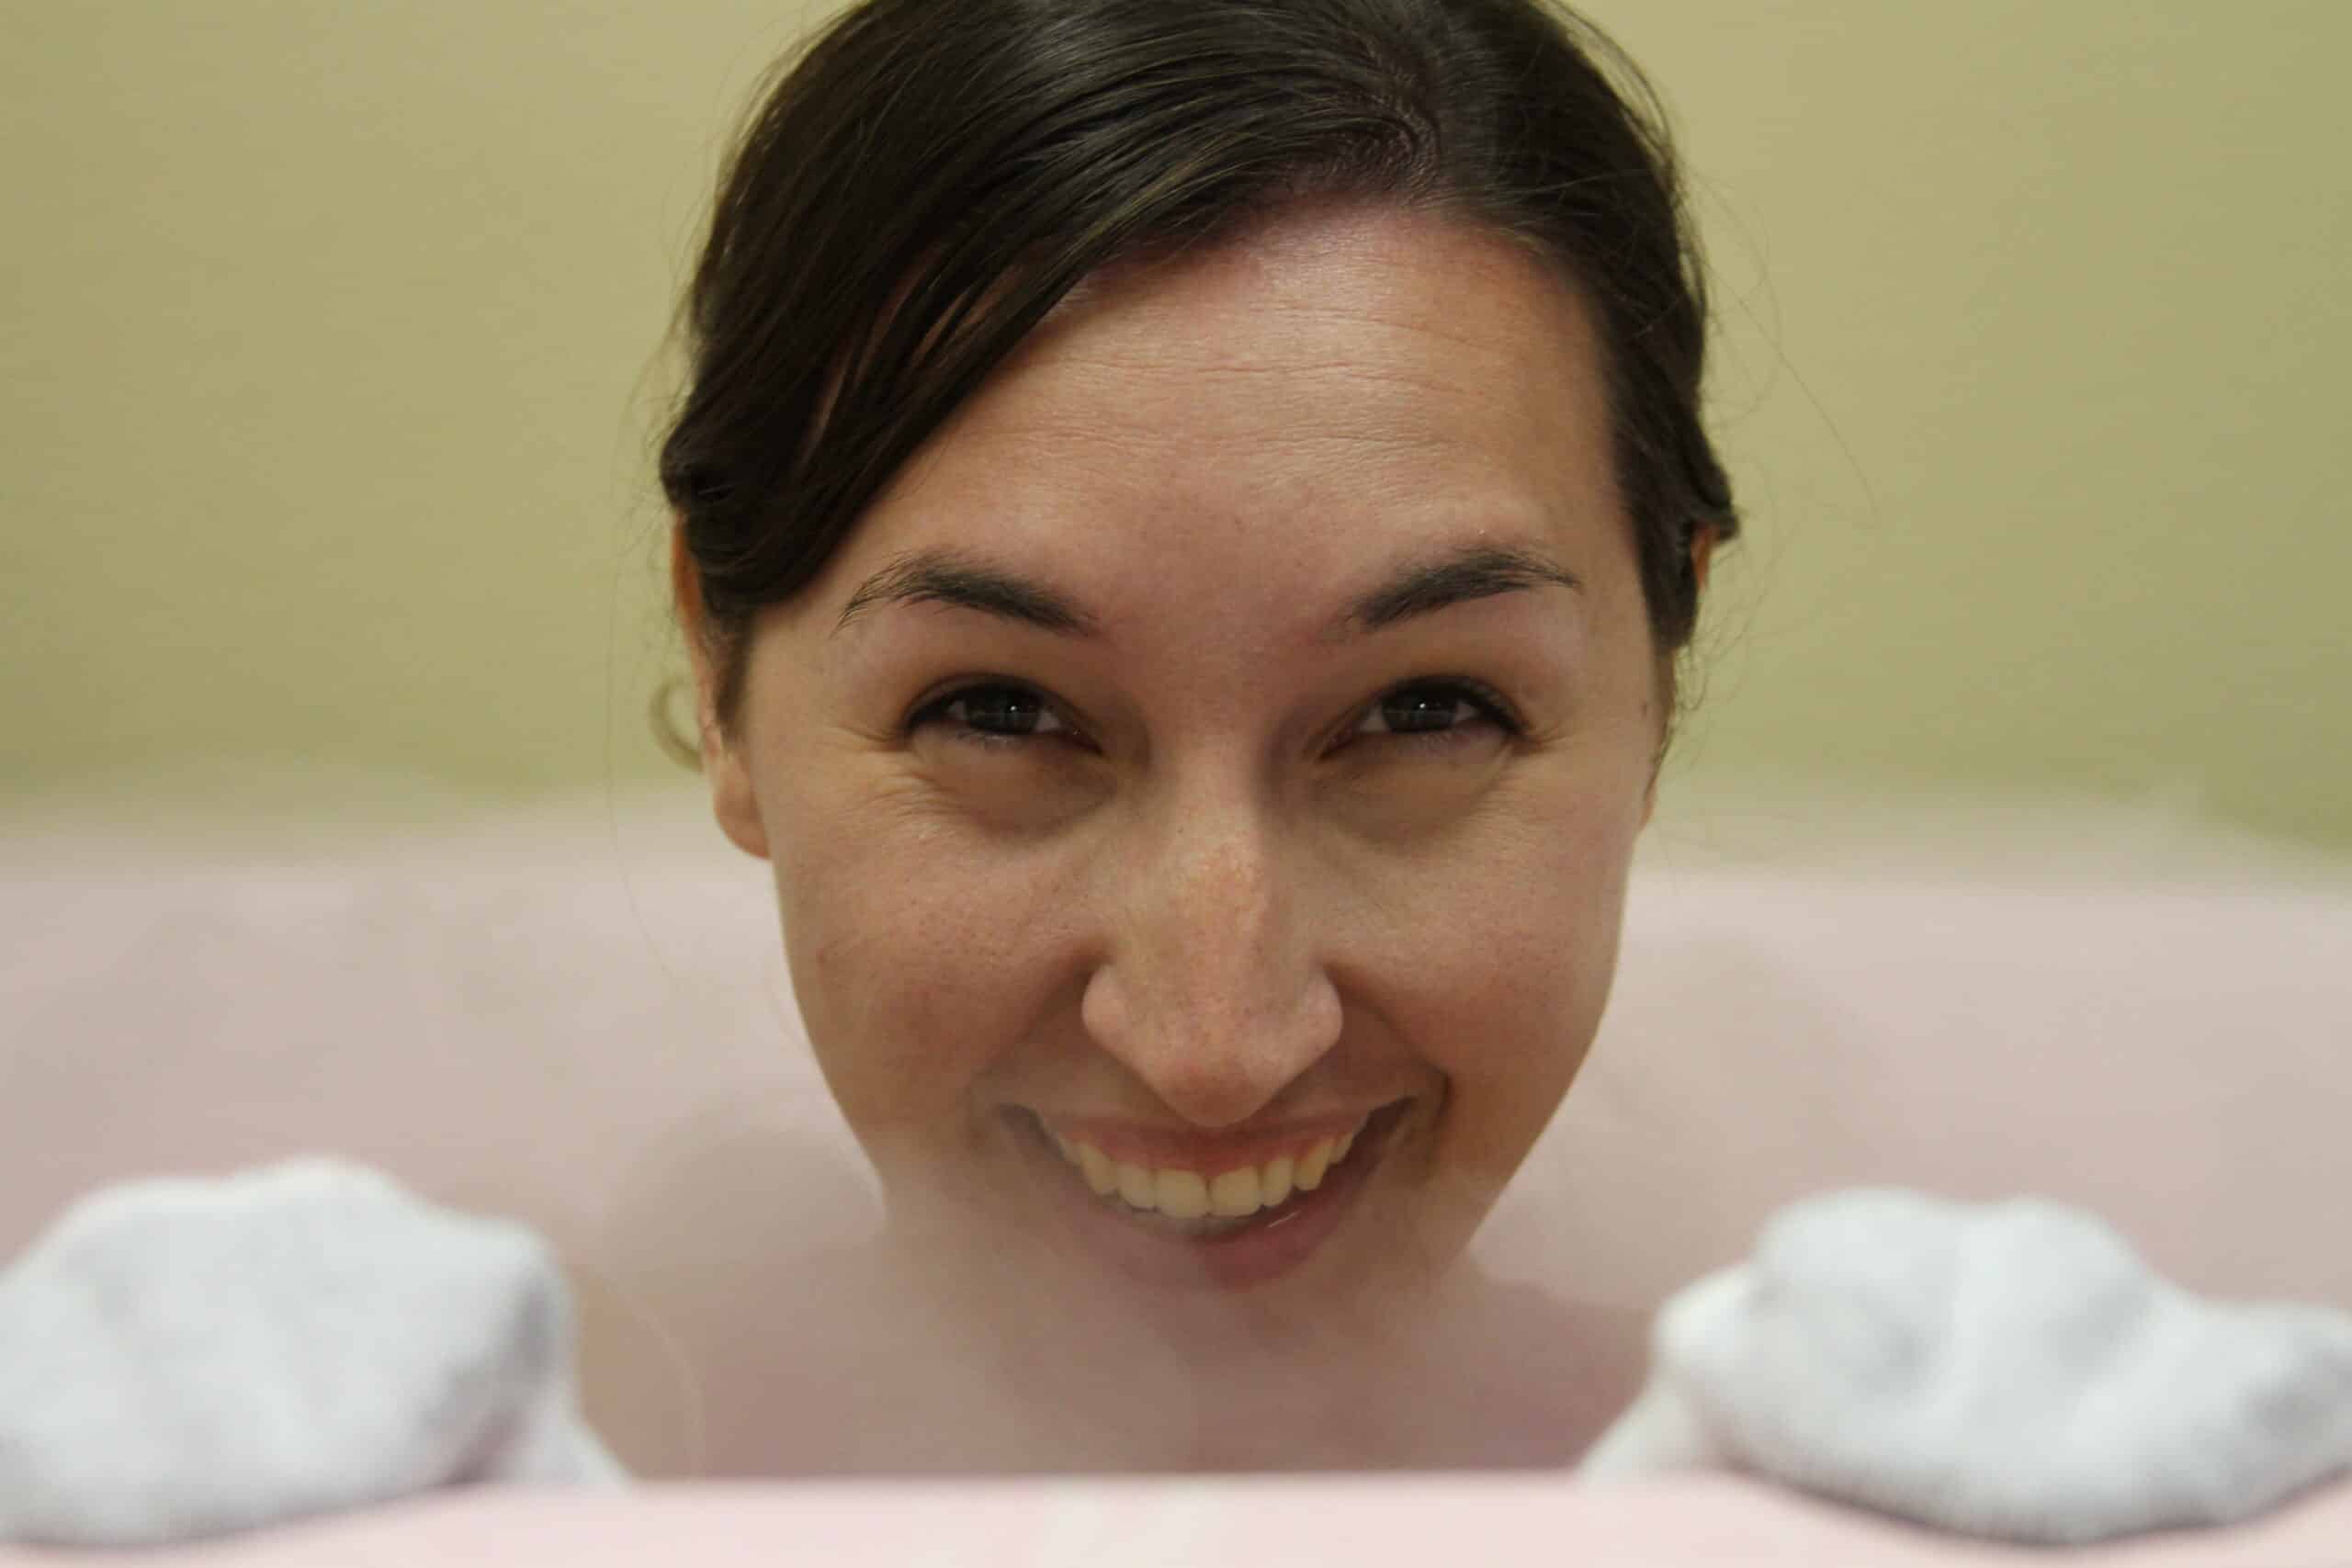 Austinot Editor Brittany Highland tried cryo therapy at Austin's first cryo studio, 